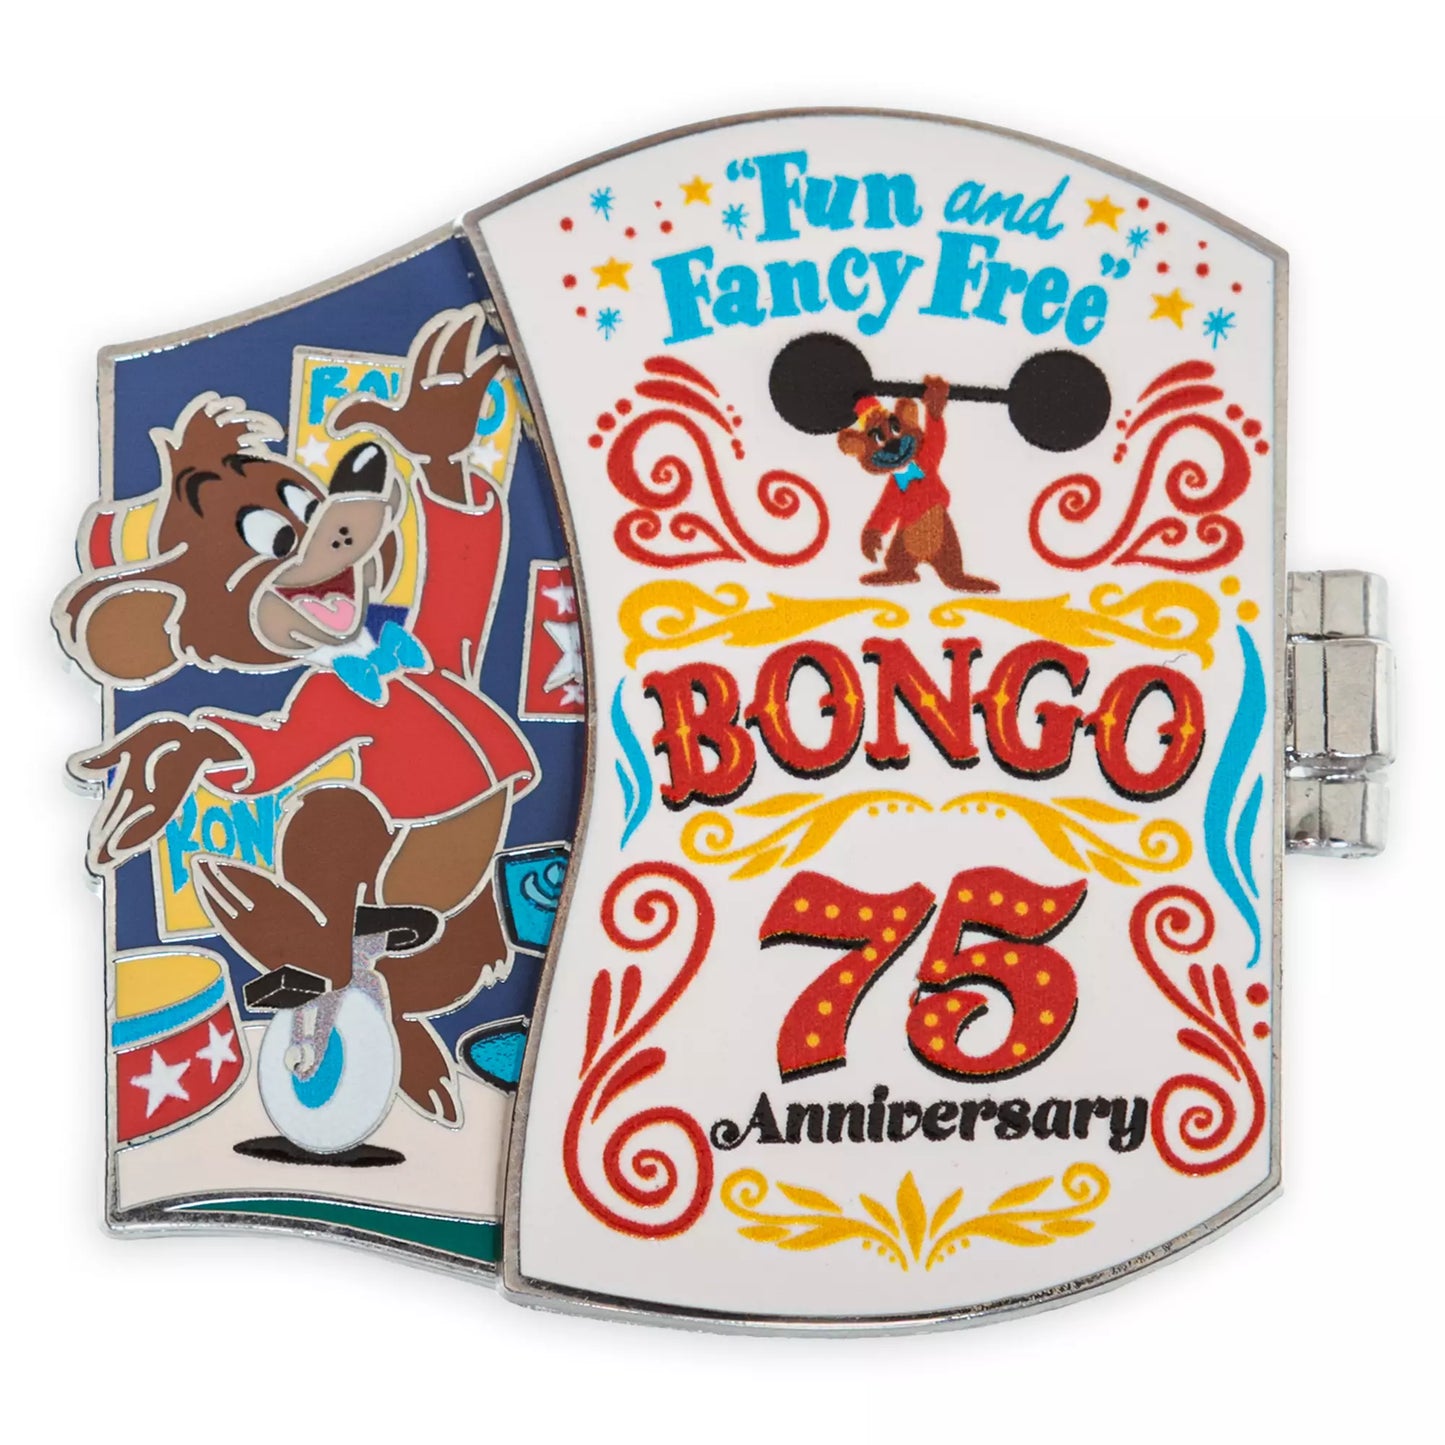 Bongo Hinged Pin – Fun and Fancy Free 75th Anniversary – Limited Release Pin